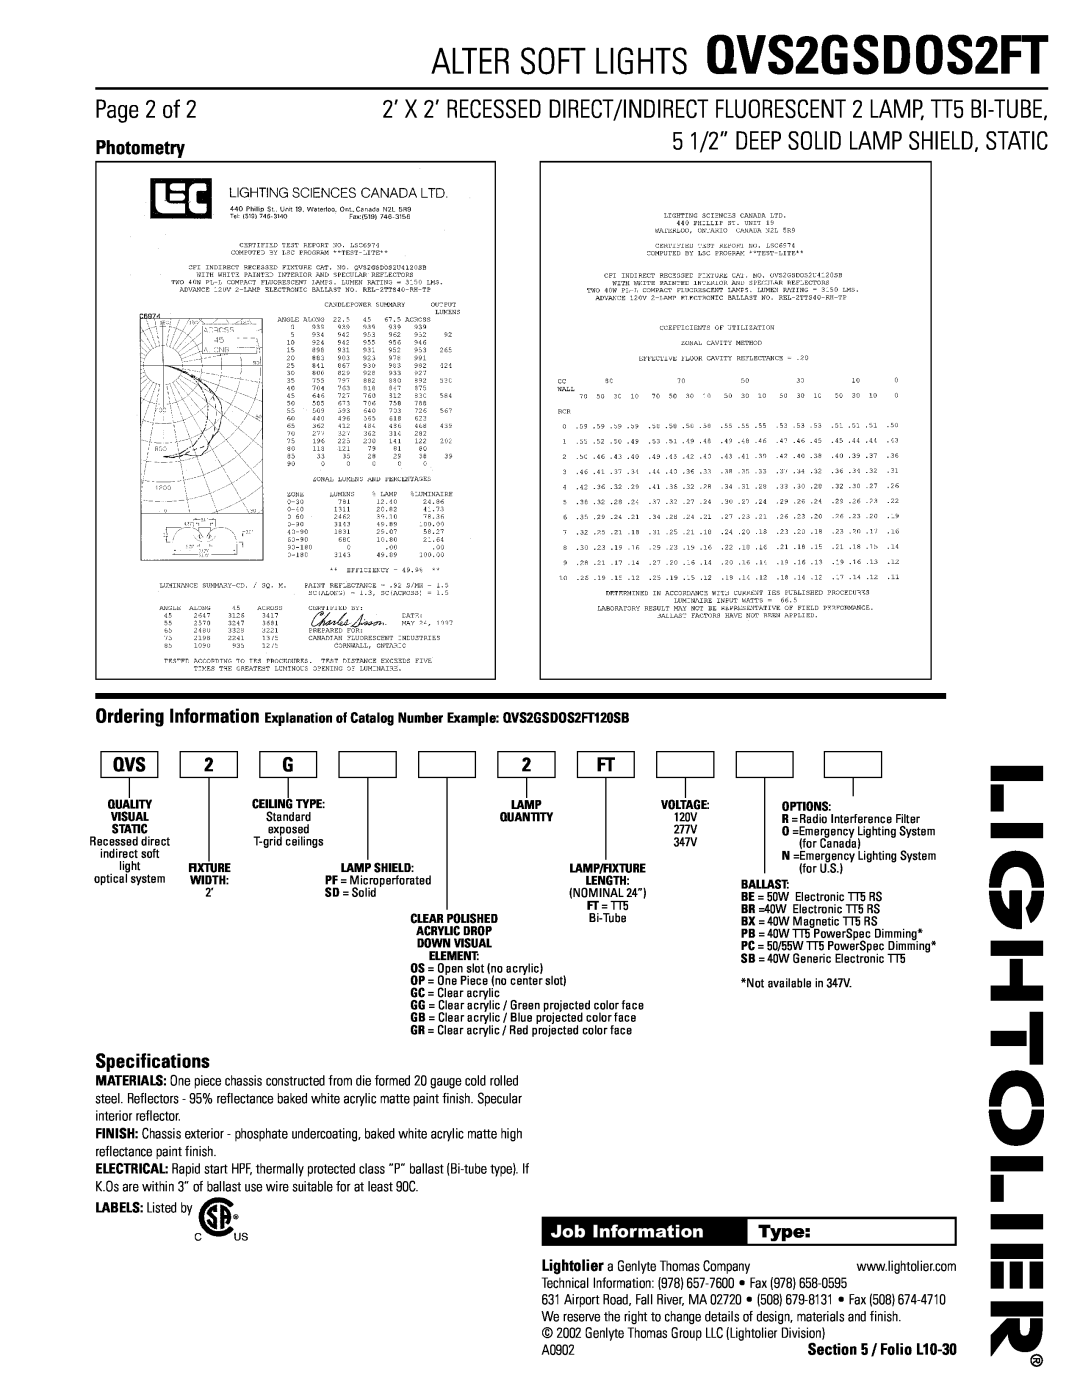 Lightolier dimensions Page 2 of, Photometry, Specifications, Type, ALTER SOFT LIGHTS QVS2GSDOS2FT, Job Information 